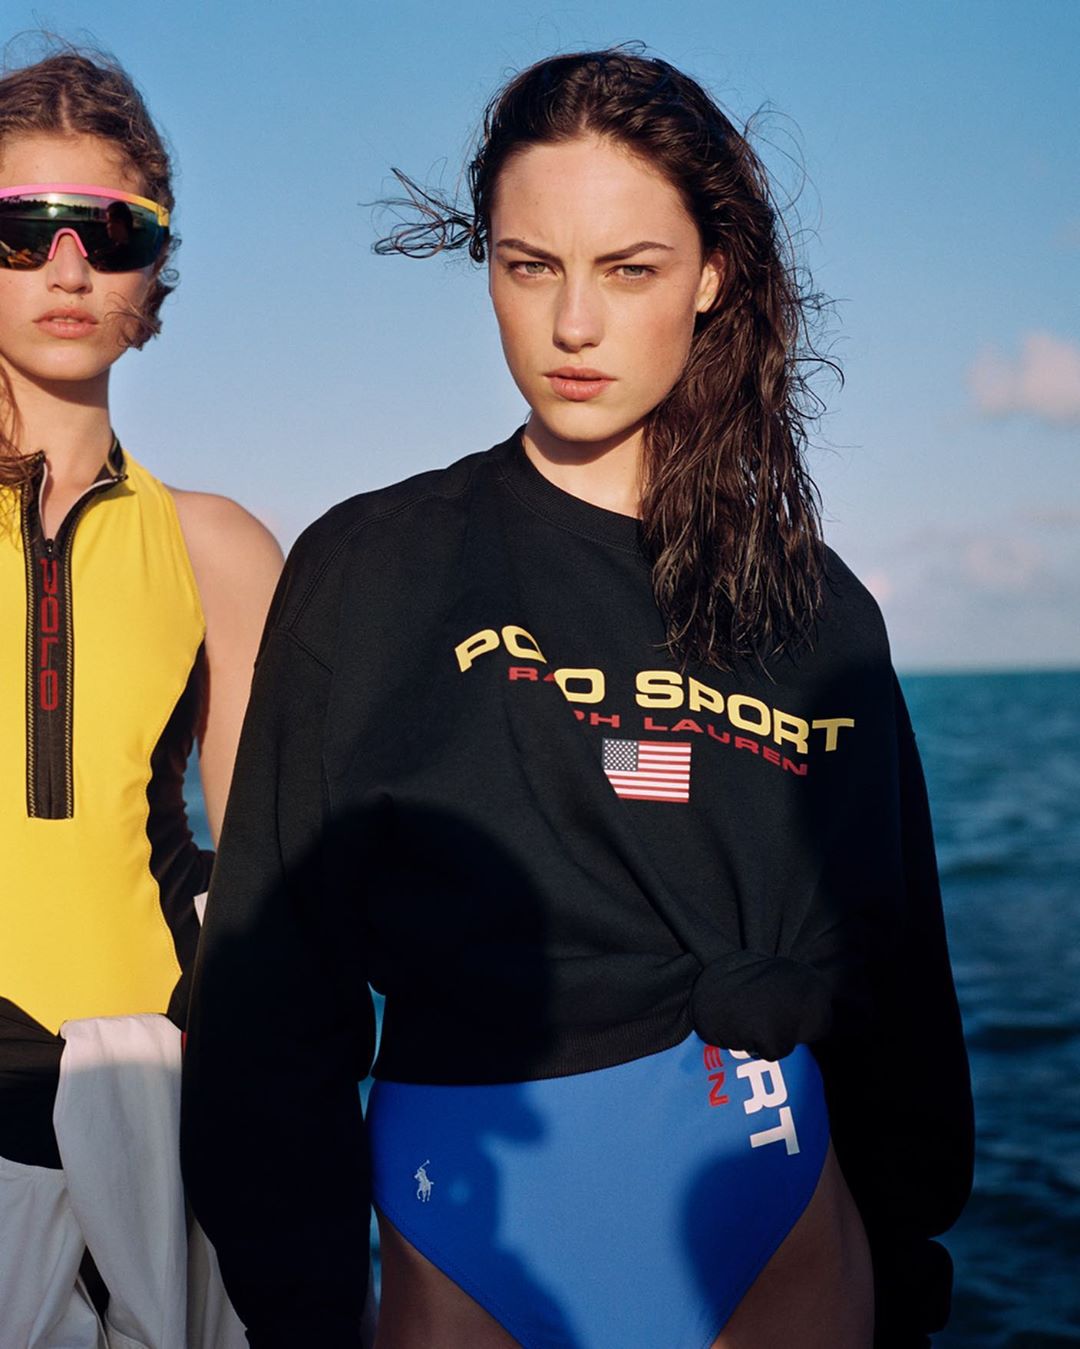 Vintage-inspired silhouettes and a bold palette recall the iconic Polo sporting attitude of the '90s. Discover the new #PoloSport collection via link: